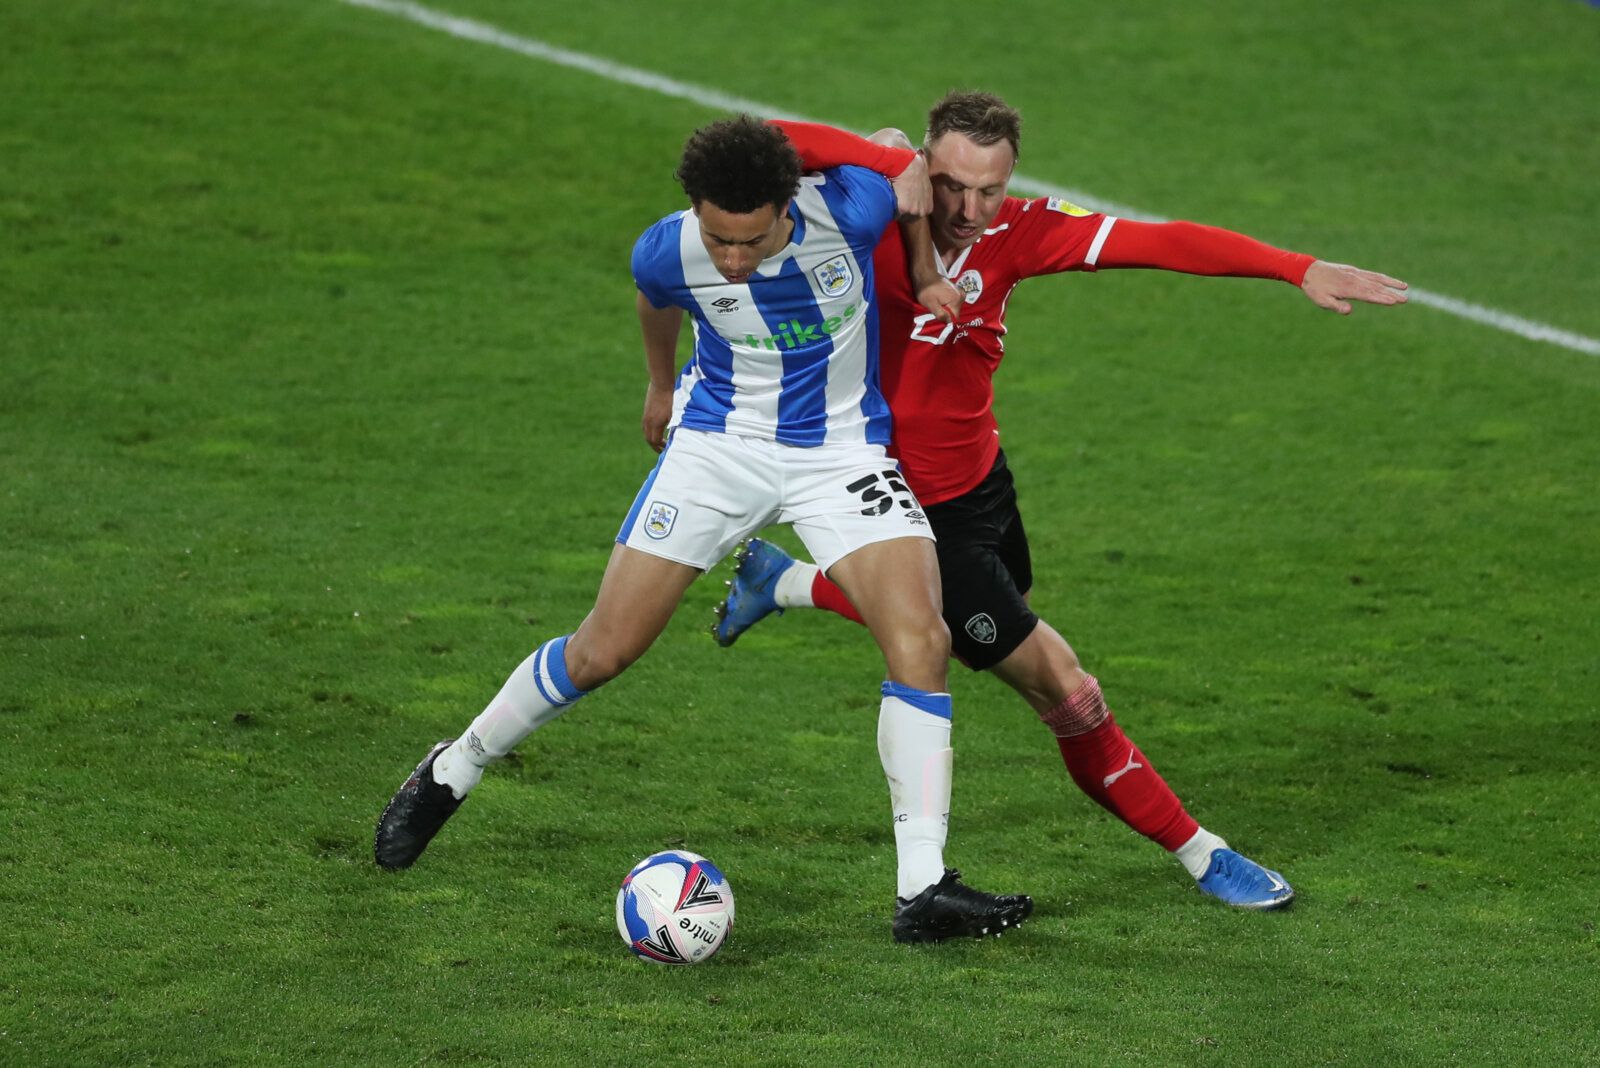 Soccer Football - Championship - Huddersfield Town v Barnsley - John Smith's Stadium, Huddersfield, Britain - April 21, 2021 Barnsley's Cauley Woodrow in action with Huddersfield Town's Rarmani Edmonds-Green Action Images/Lee Smith EDITORIAL USE ONLY. No use with unauthorized audio, video, data, fixture lists, club/league logos or 'live' services. Online in-match use limited to 75 images, no video emulation. No use in betting, games or single club /league/player publications.  Please contact you